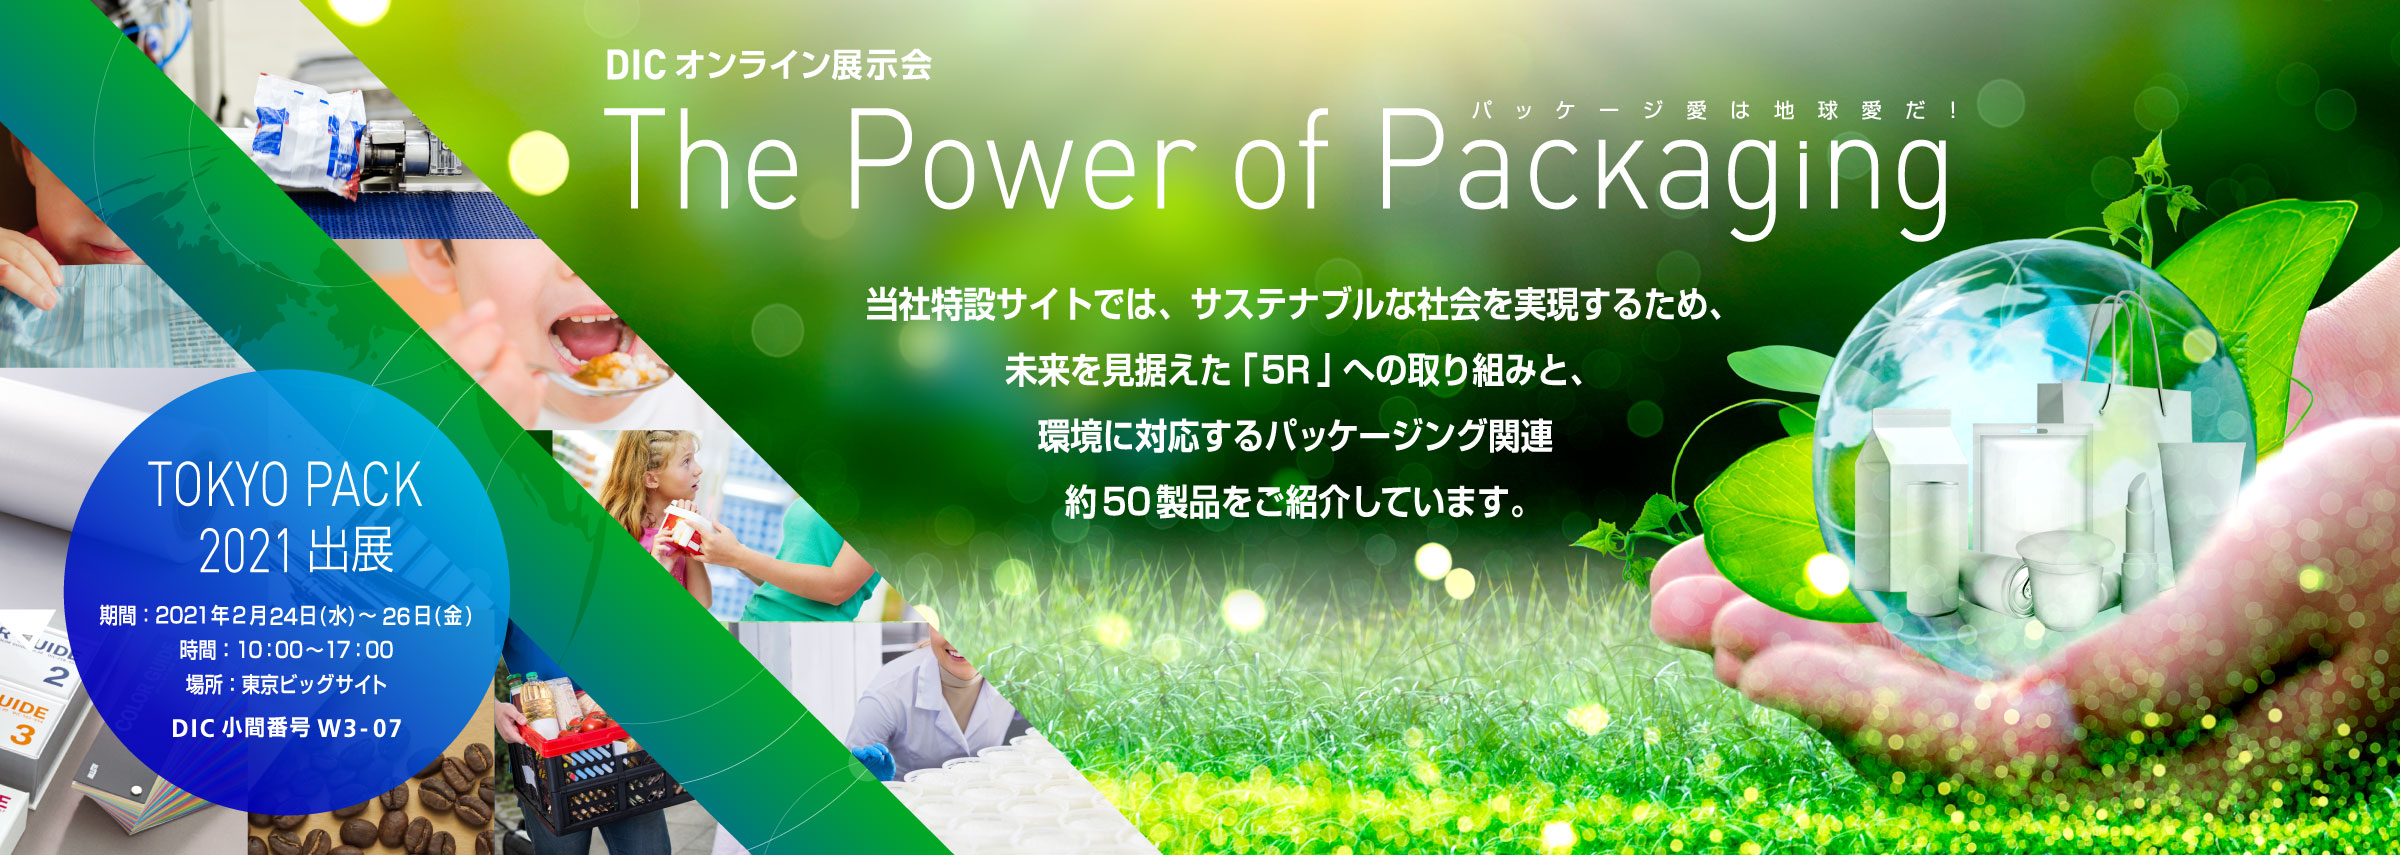 DICオンライン展示会  The Power of Packaging